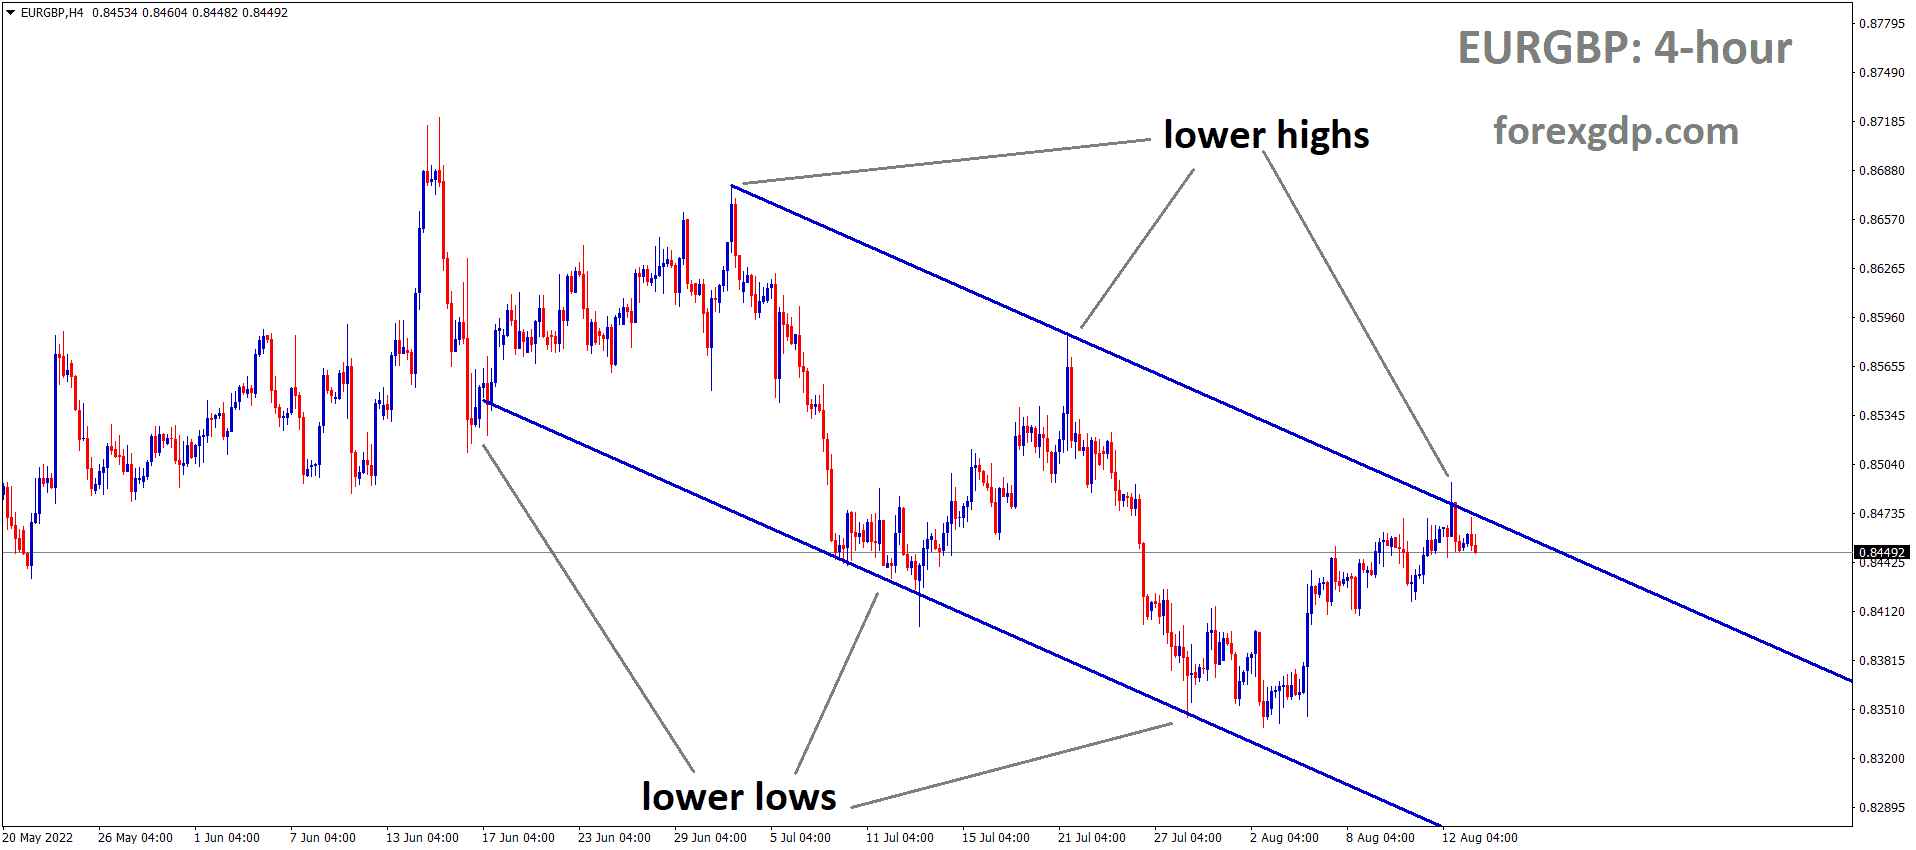 EURGBP is moving in the Descending channel and the Market has fallen from the Lower high area of the channel